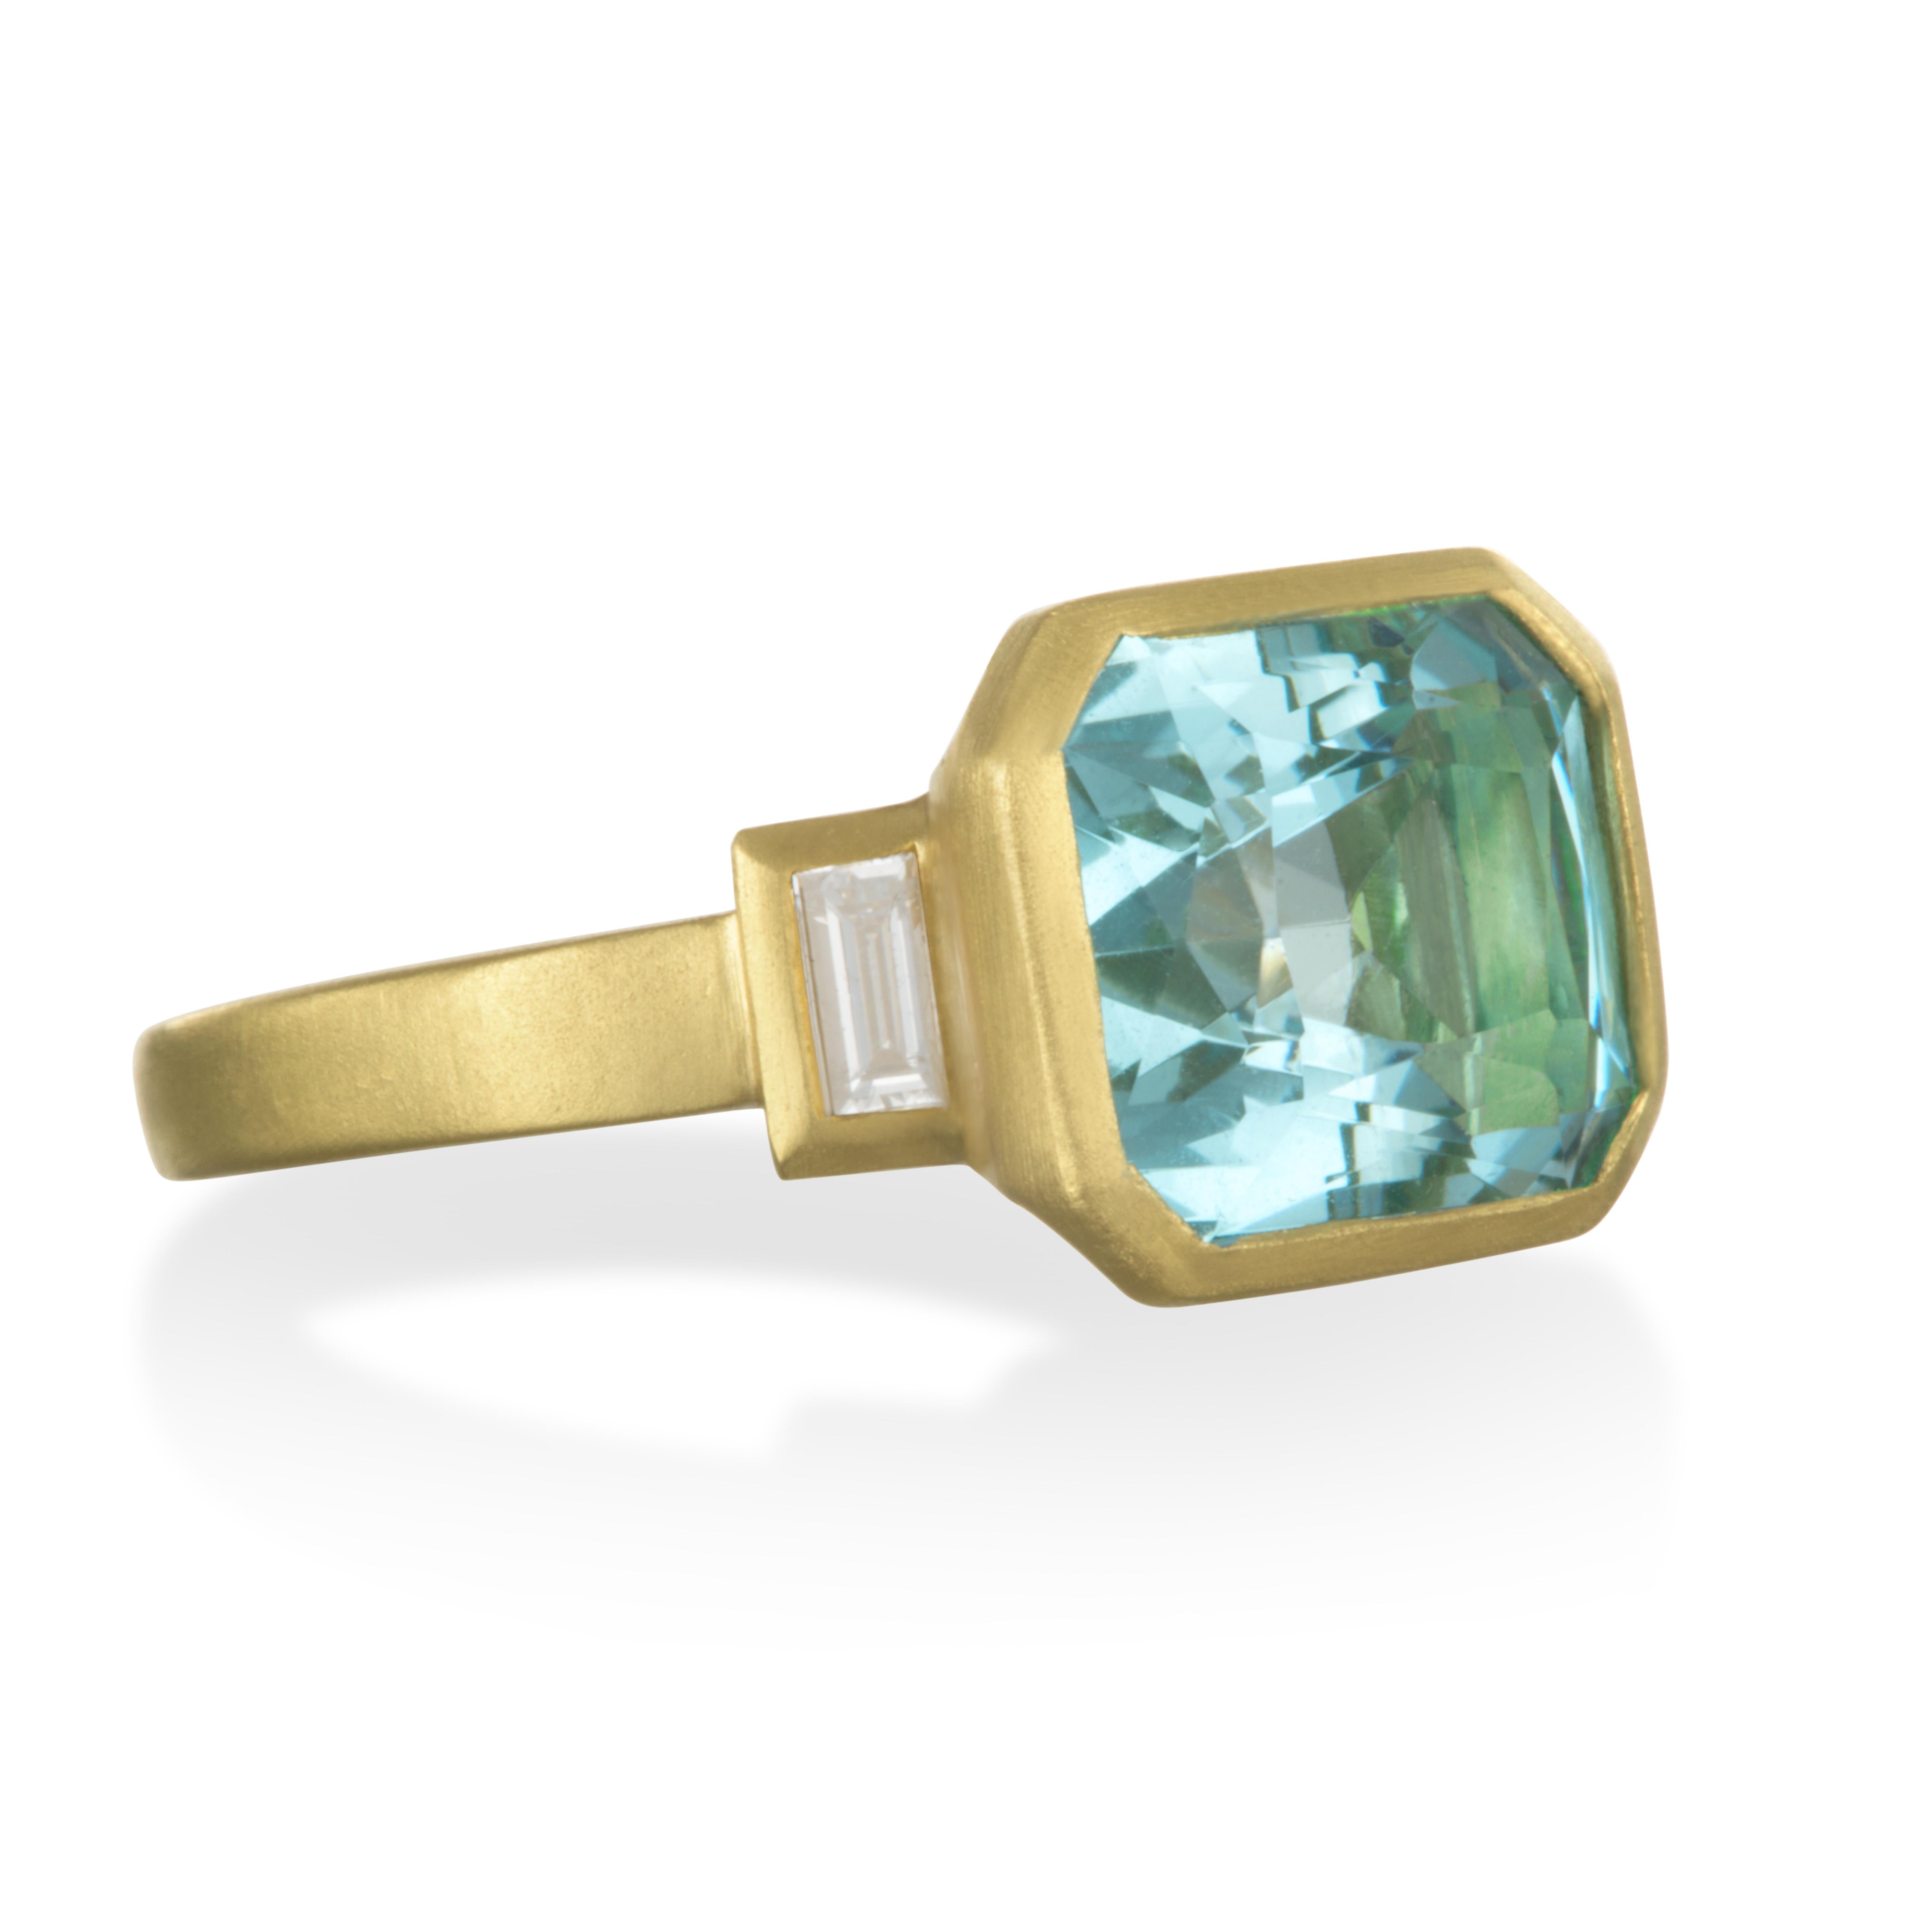 Faye Kim 18k Gold Diamond and Aquamarine Cushion Cut Cocktail Ring

Bright Aquamarine with stacked diamond baguettes make for the most stunning combination.  

Diamond Baguettes - .23 cts. twt
Aquamarine - 4.68 cts. twt

Size 6.75

Made in the USA